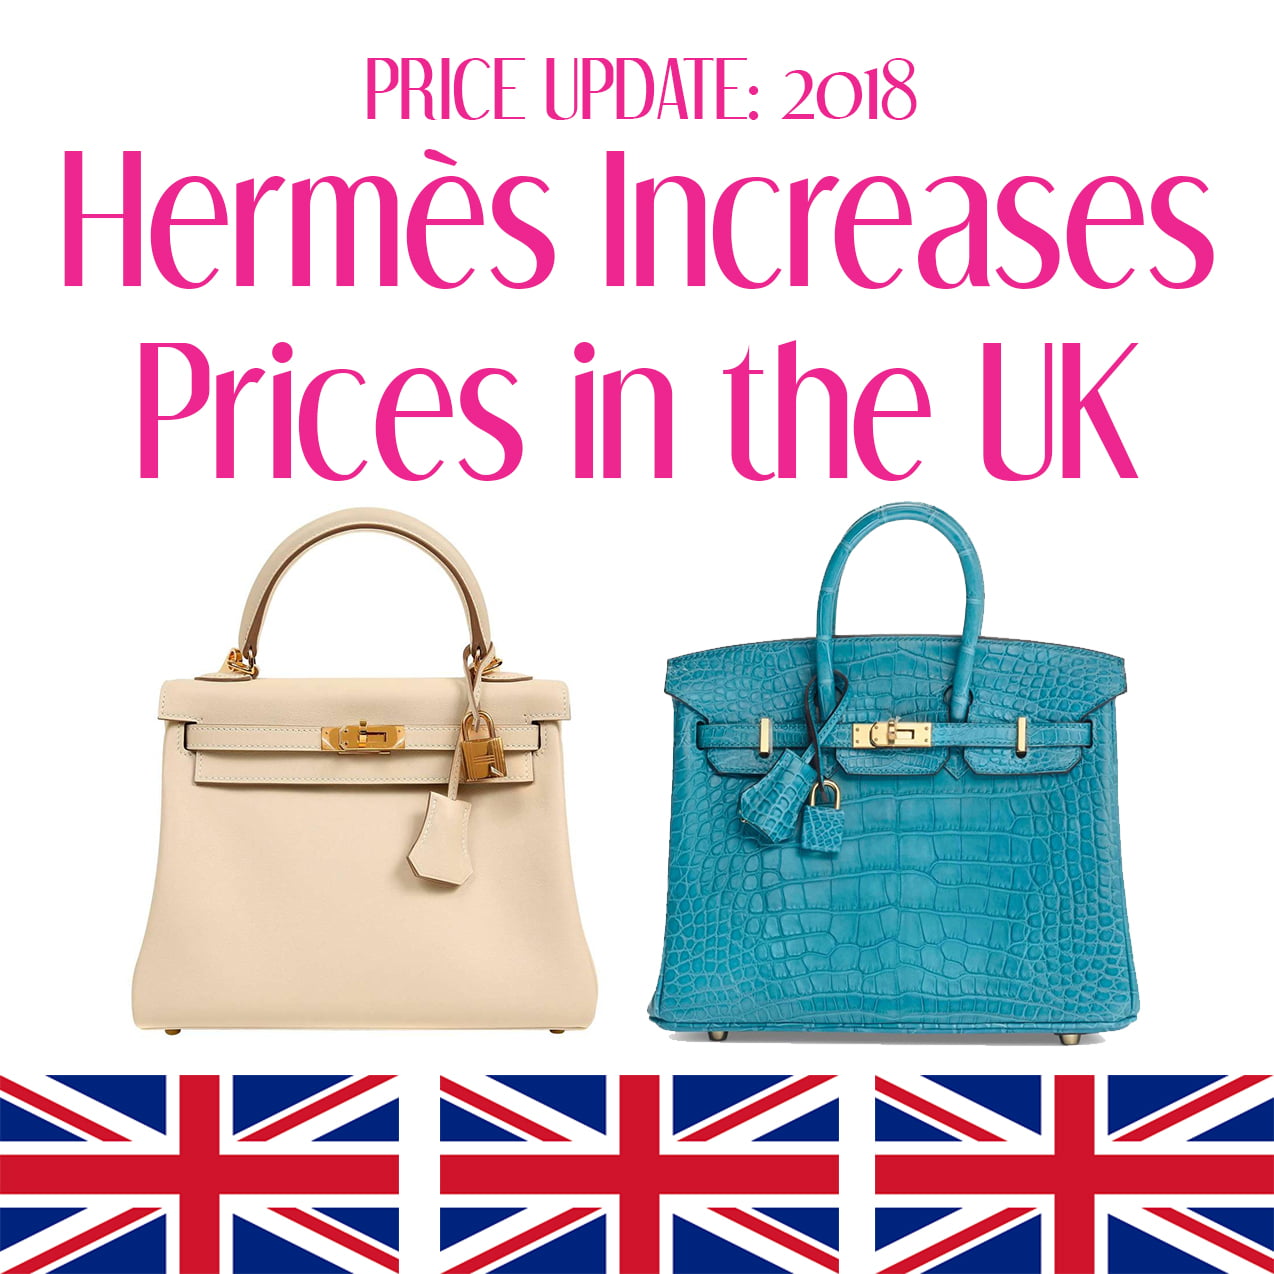 Hermes news! All the mini bags took a huge price increase! I guess